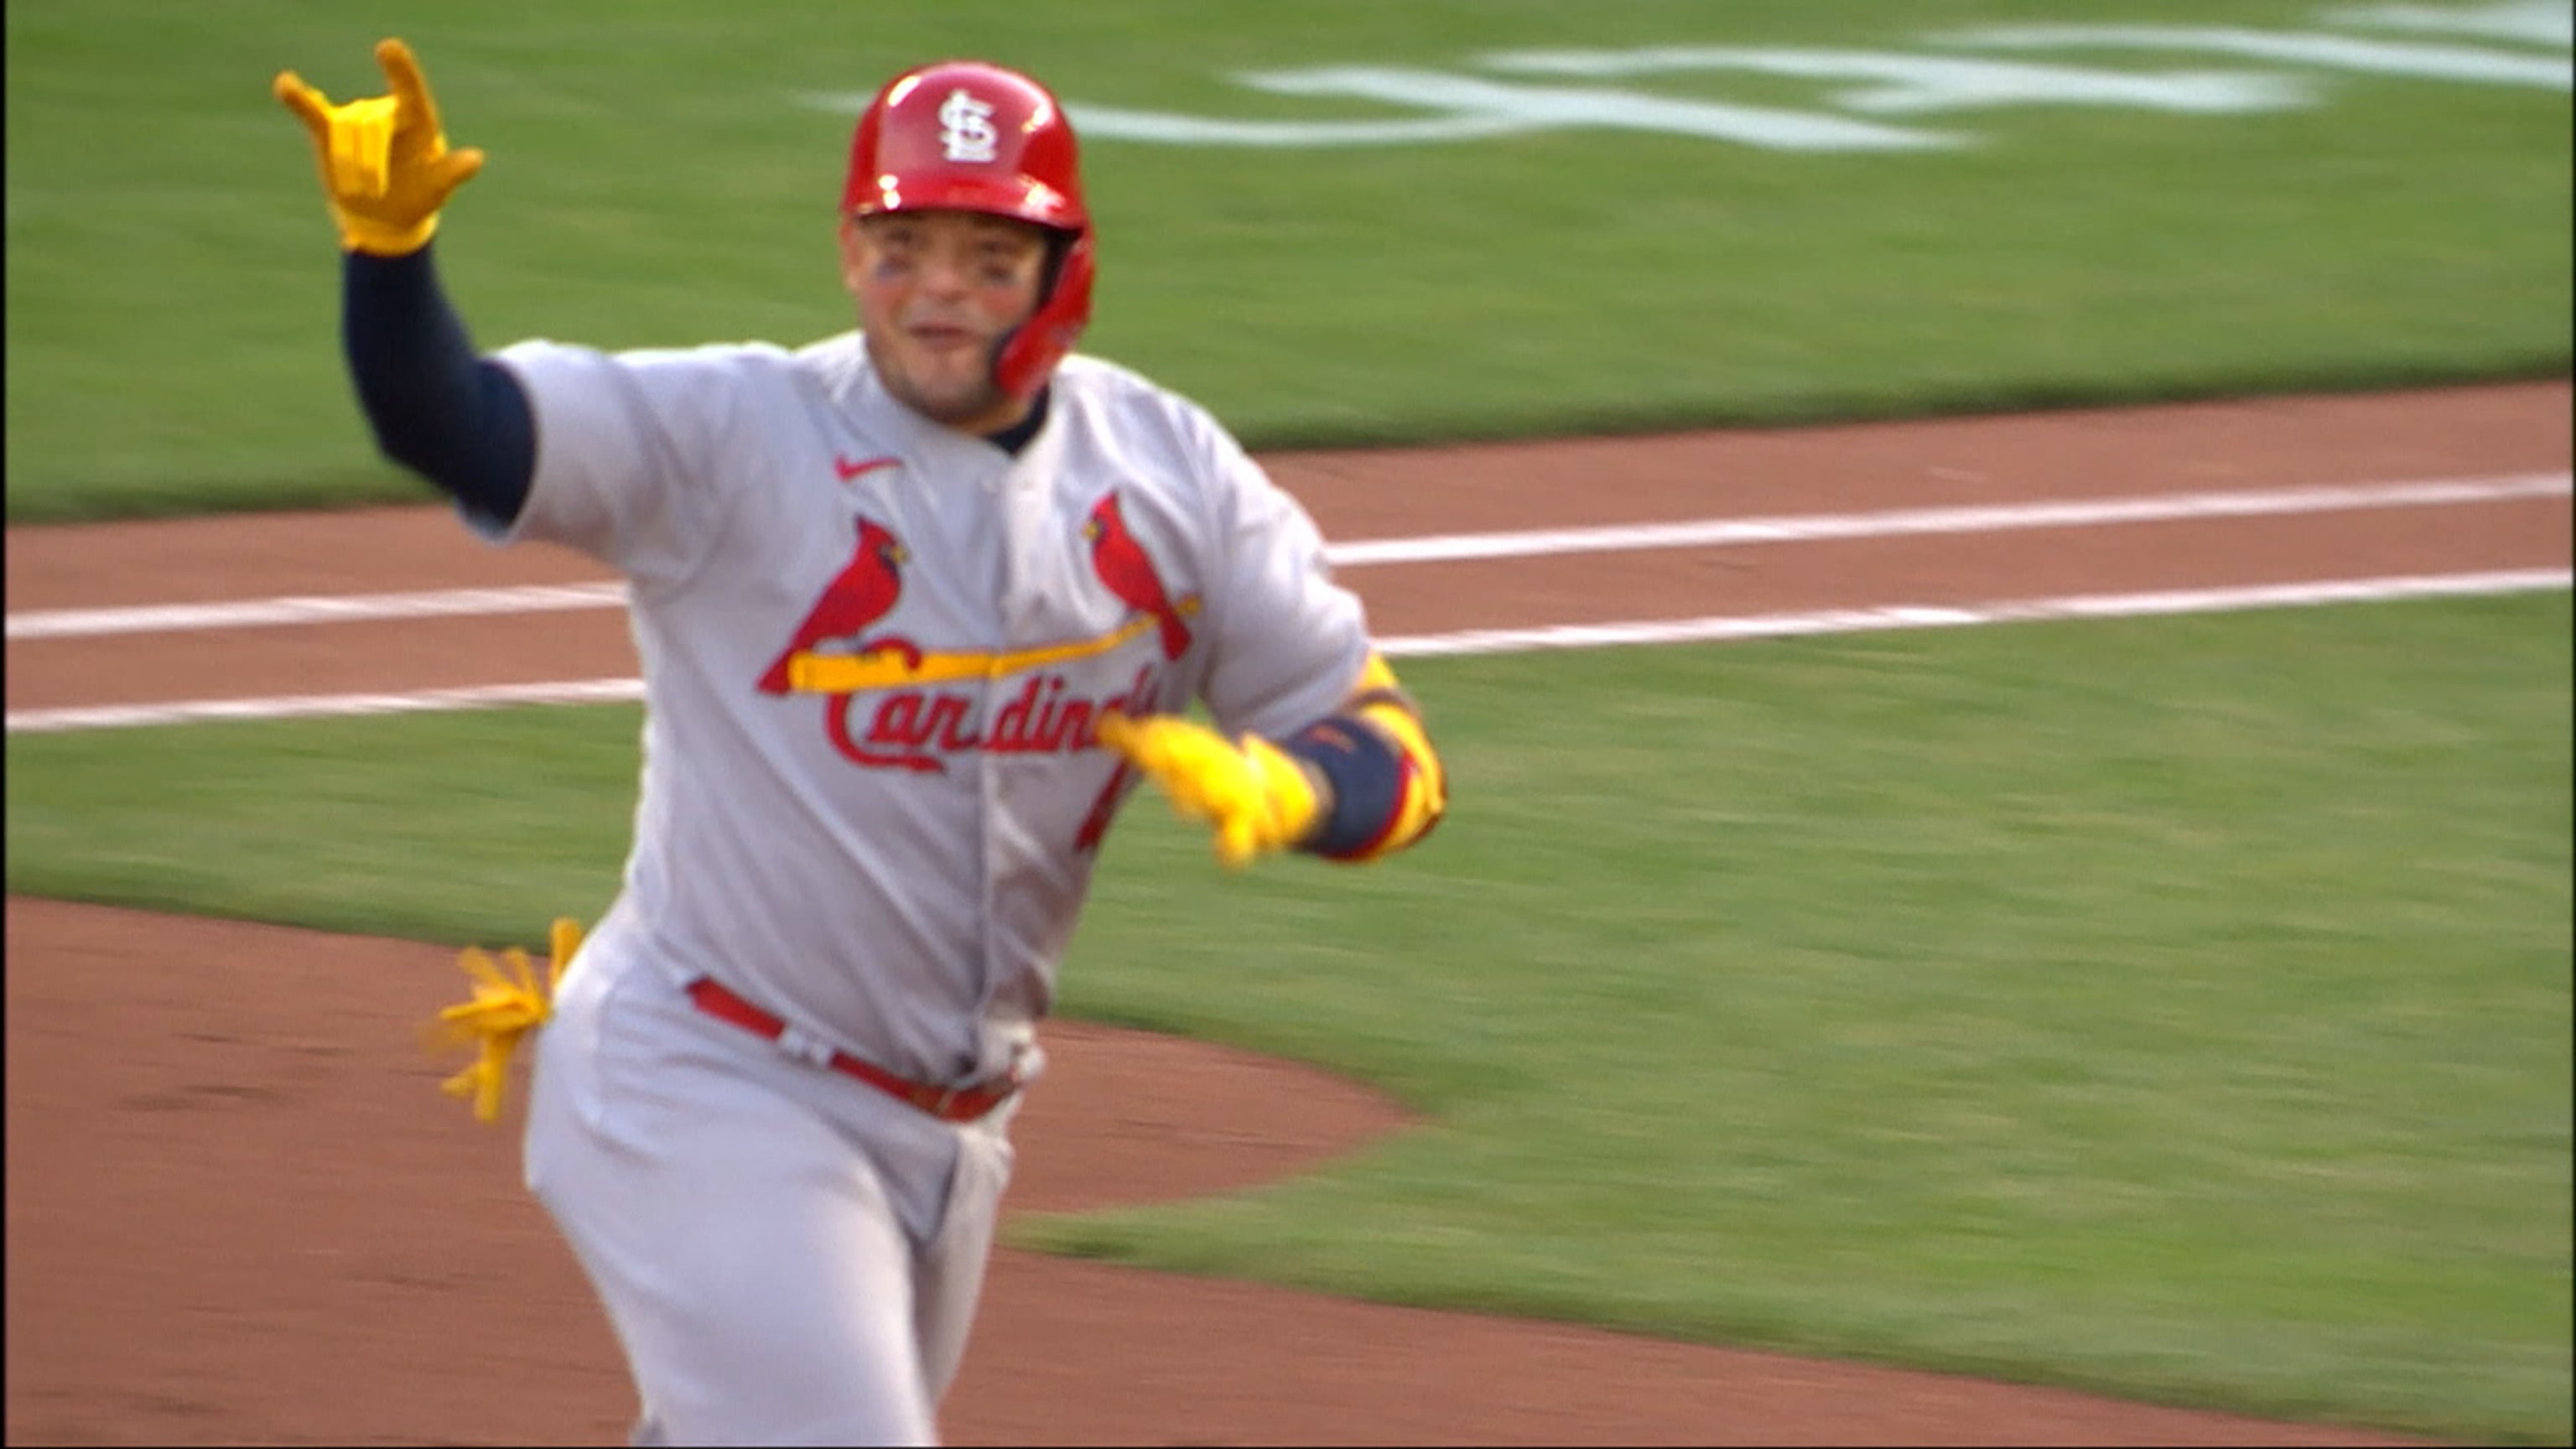 Edman absolves Cardinals' bases-loaded woes with walk-off hit Sunday